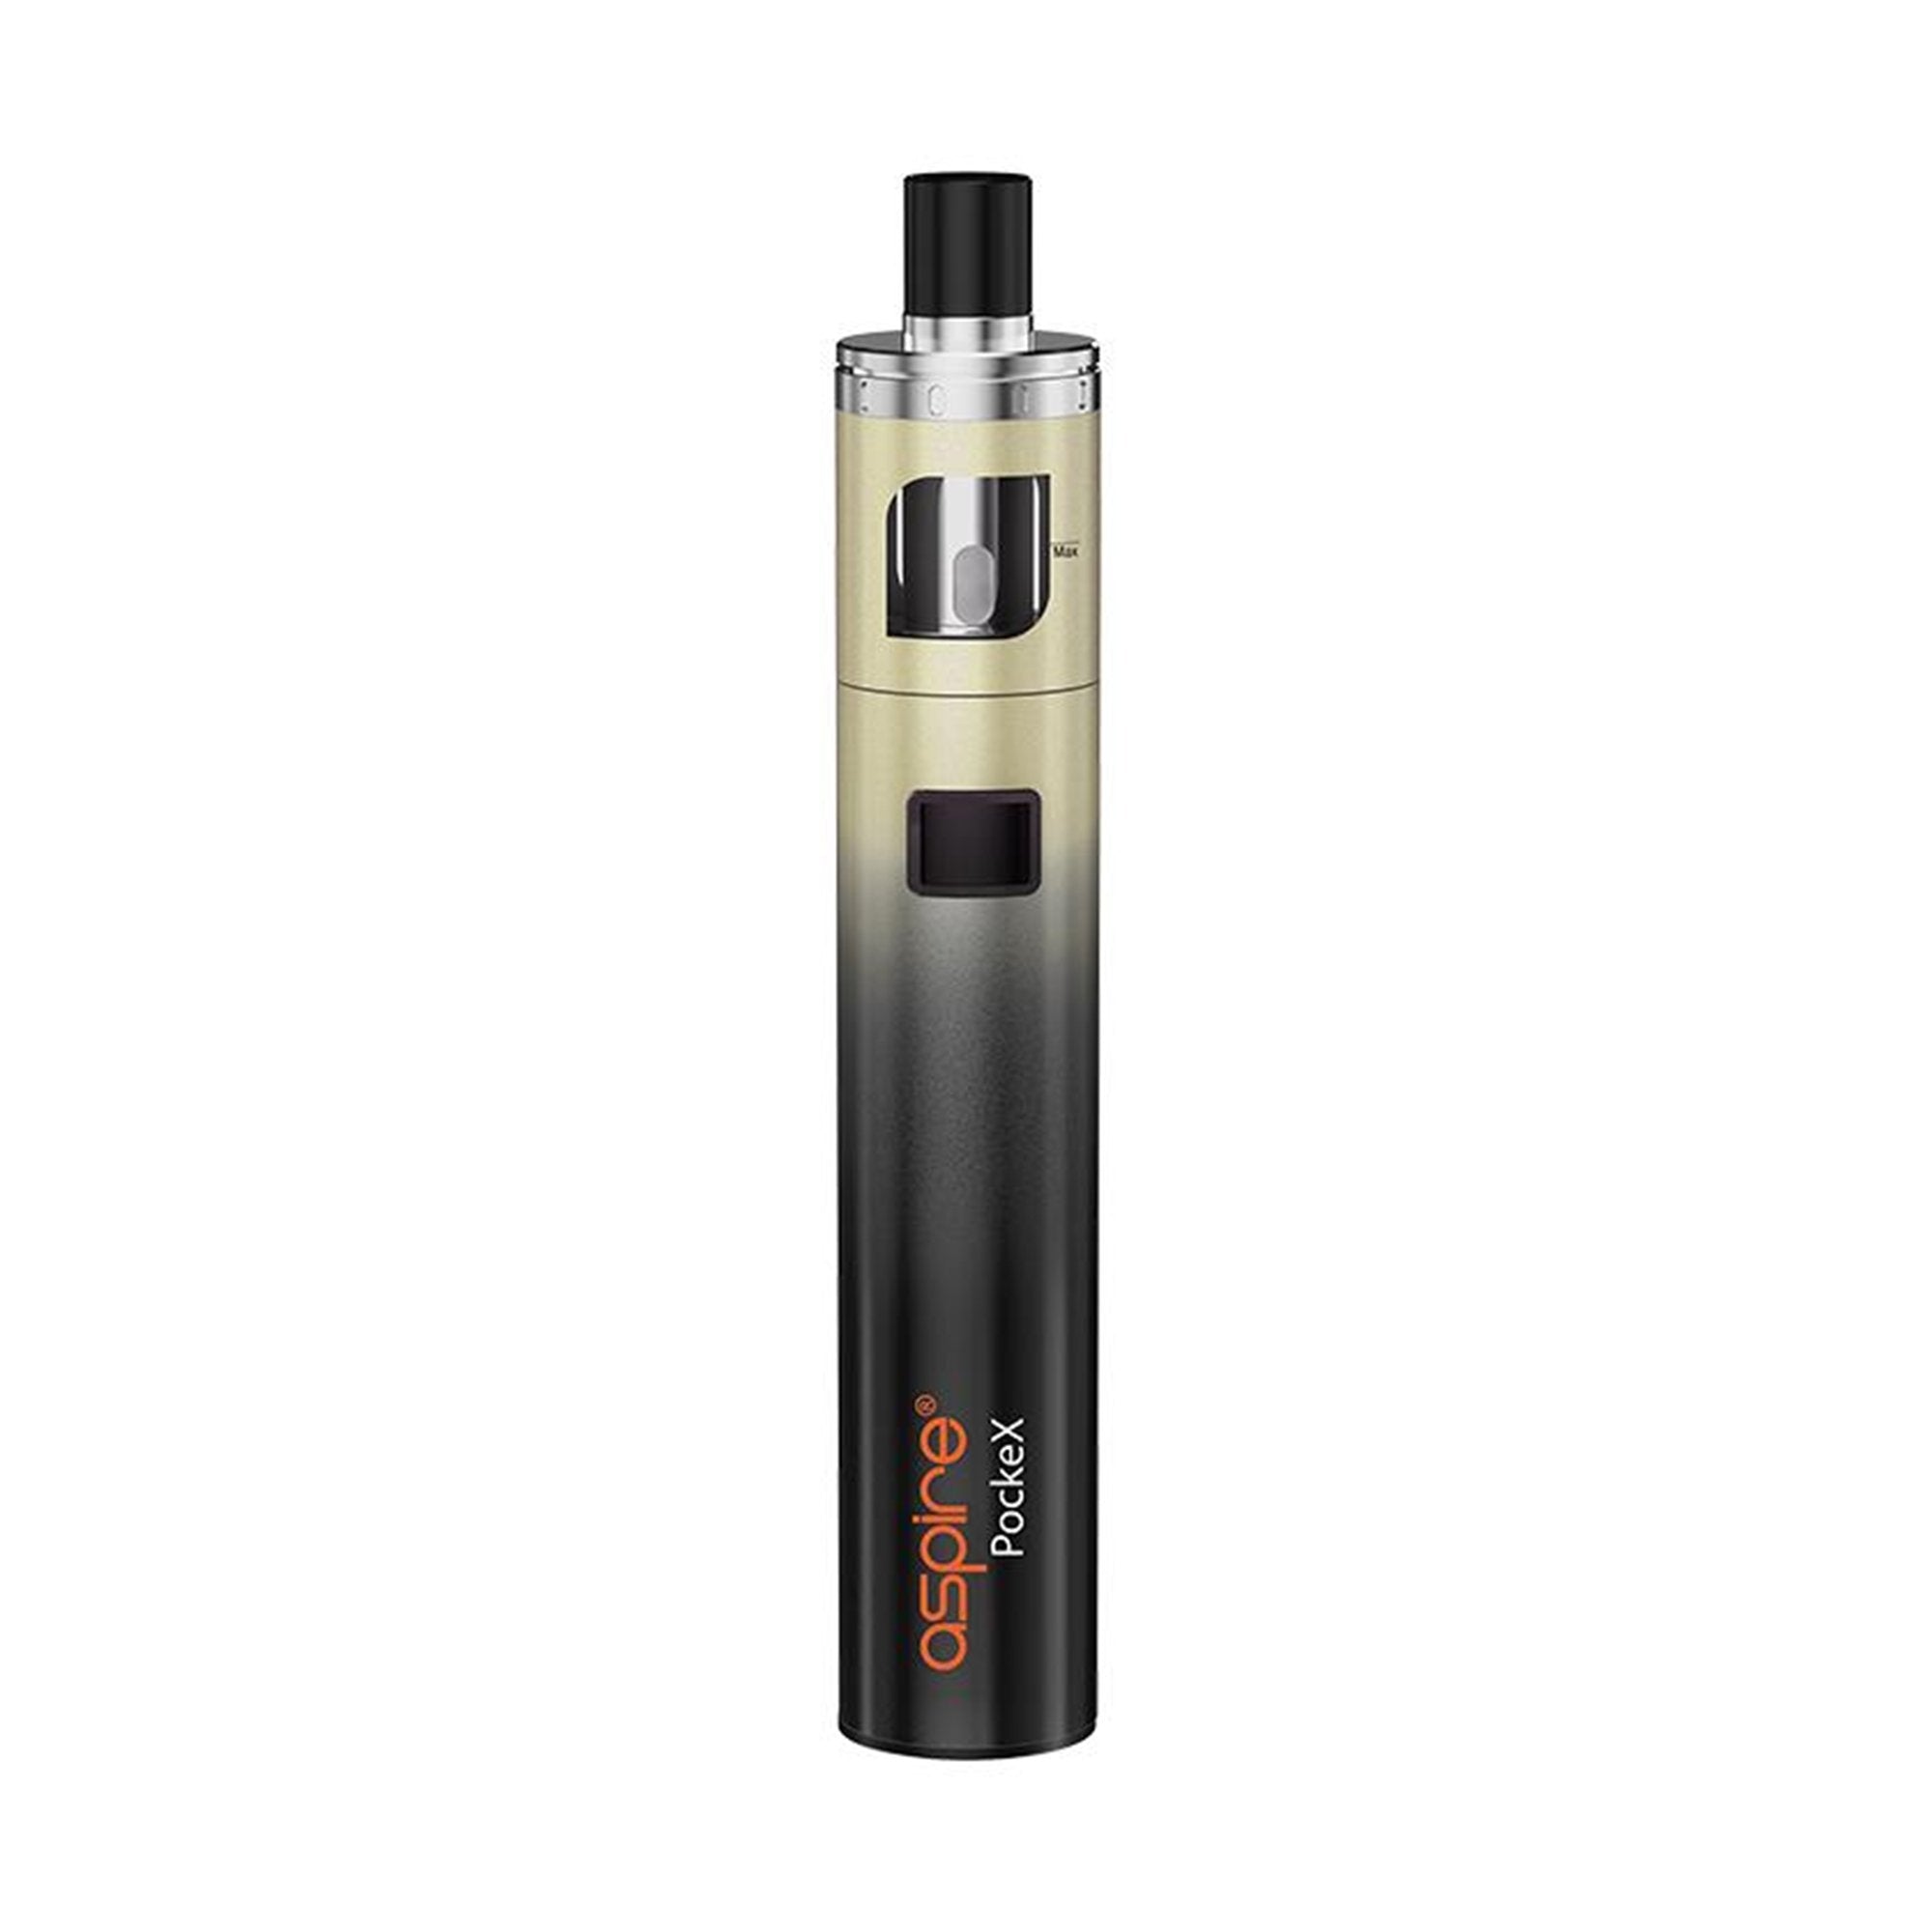 Aspire | PockeX AIO Kit | Wolfvapes - Wolfvapes.co.uk-Gold Gradient